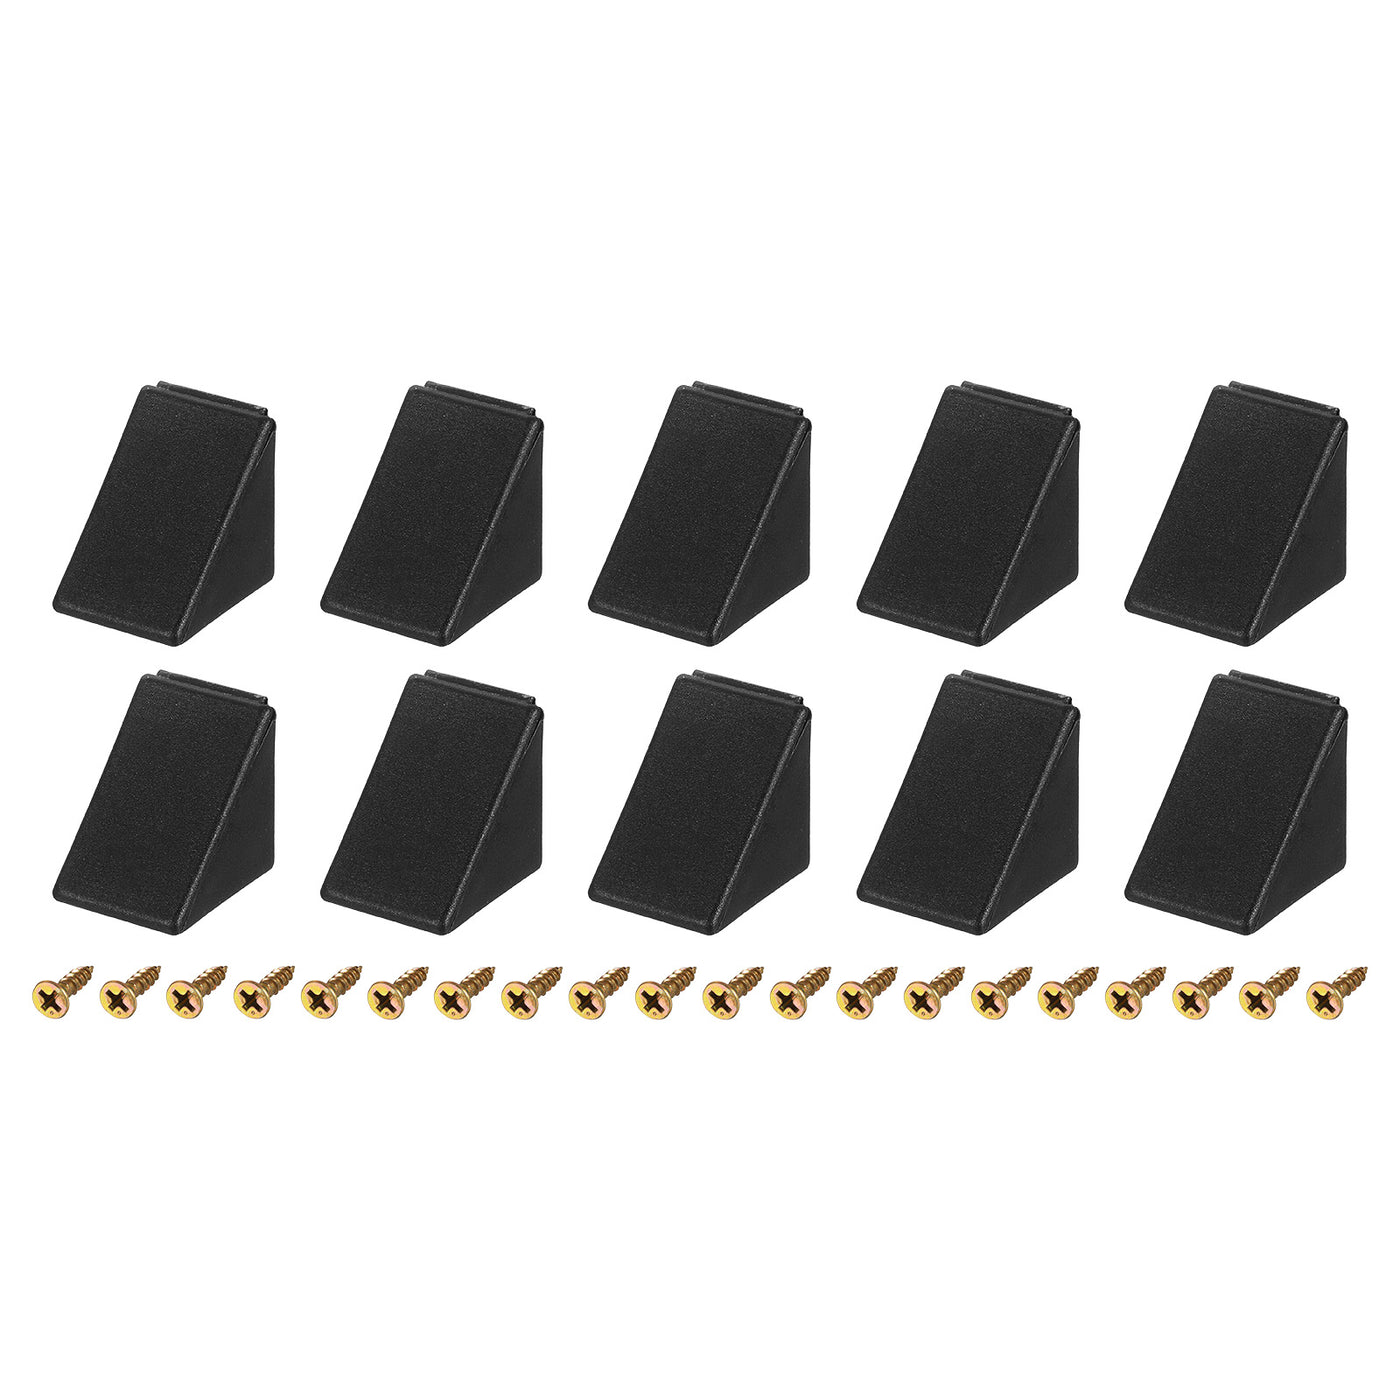 uxcell Uxcell 10Pcs 90 Degree Plastic Corner Braces with Cover Cap, 17.2x21x21mm Nylon Shelf Right Angle Brackets with Screws for Cabinets, Cupboards (Black)